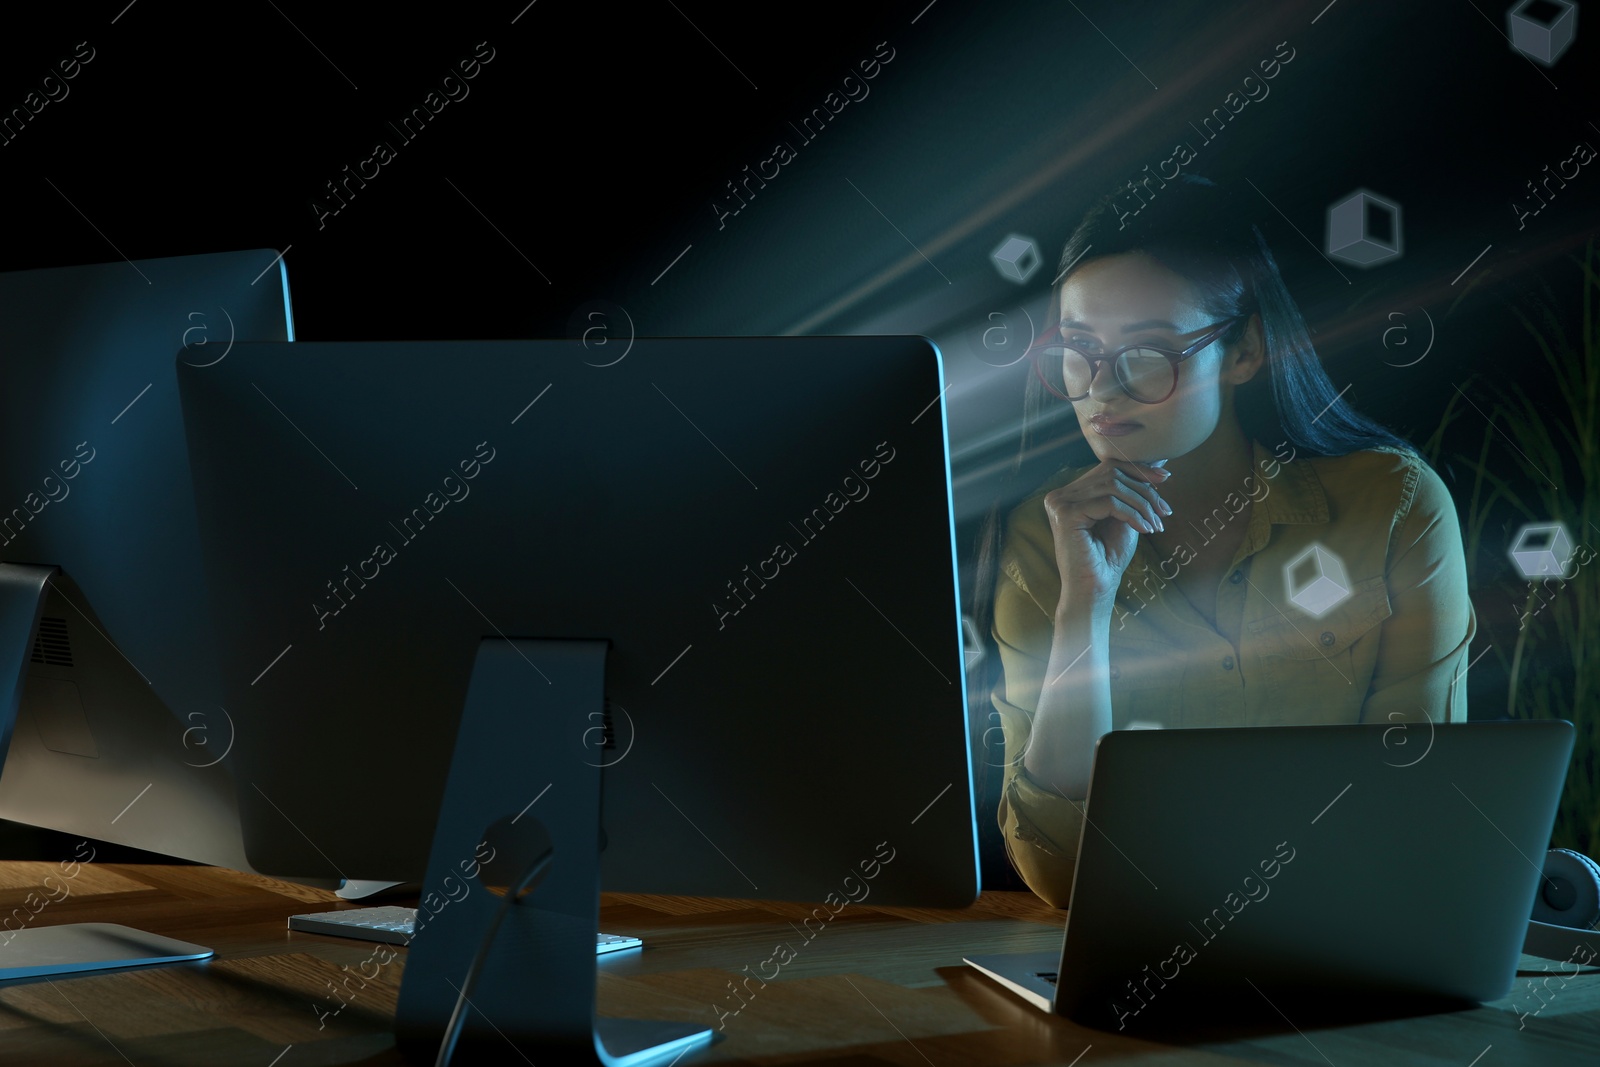 Image of Speed internet. Concentrated woman working with computer at table. Motion blur effect symbolizing fast connection